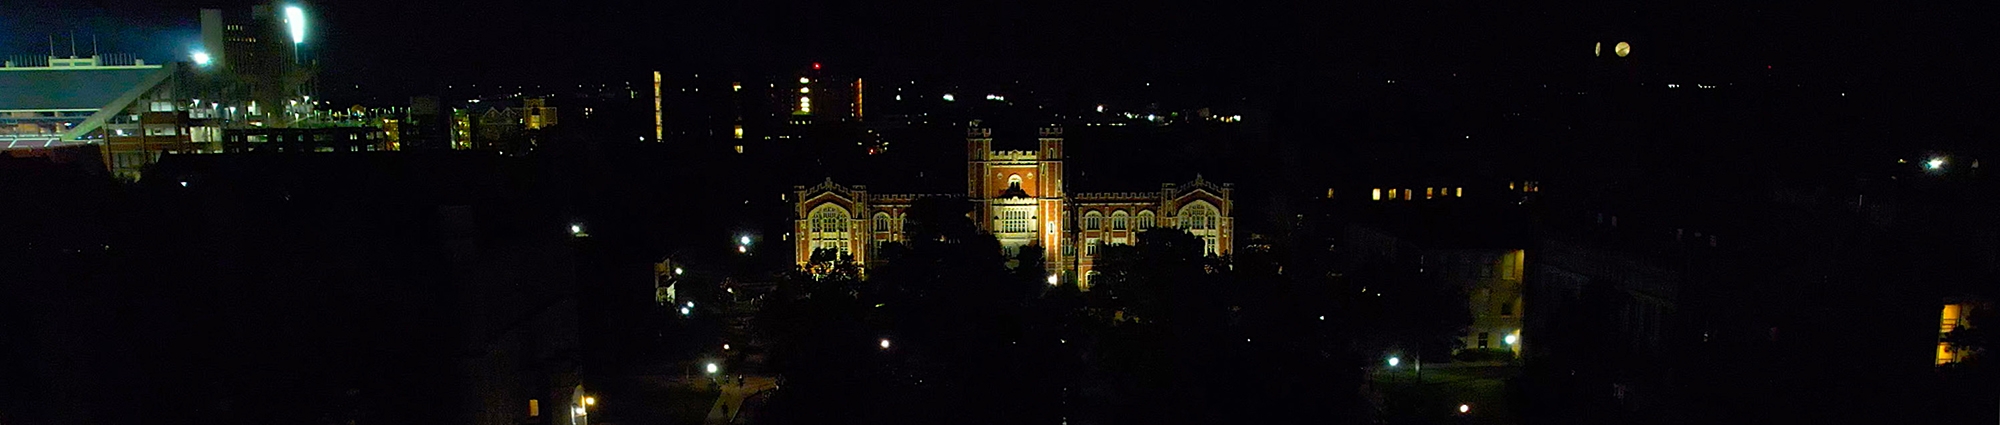 Evans Hall in the evening.